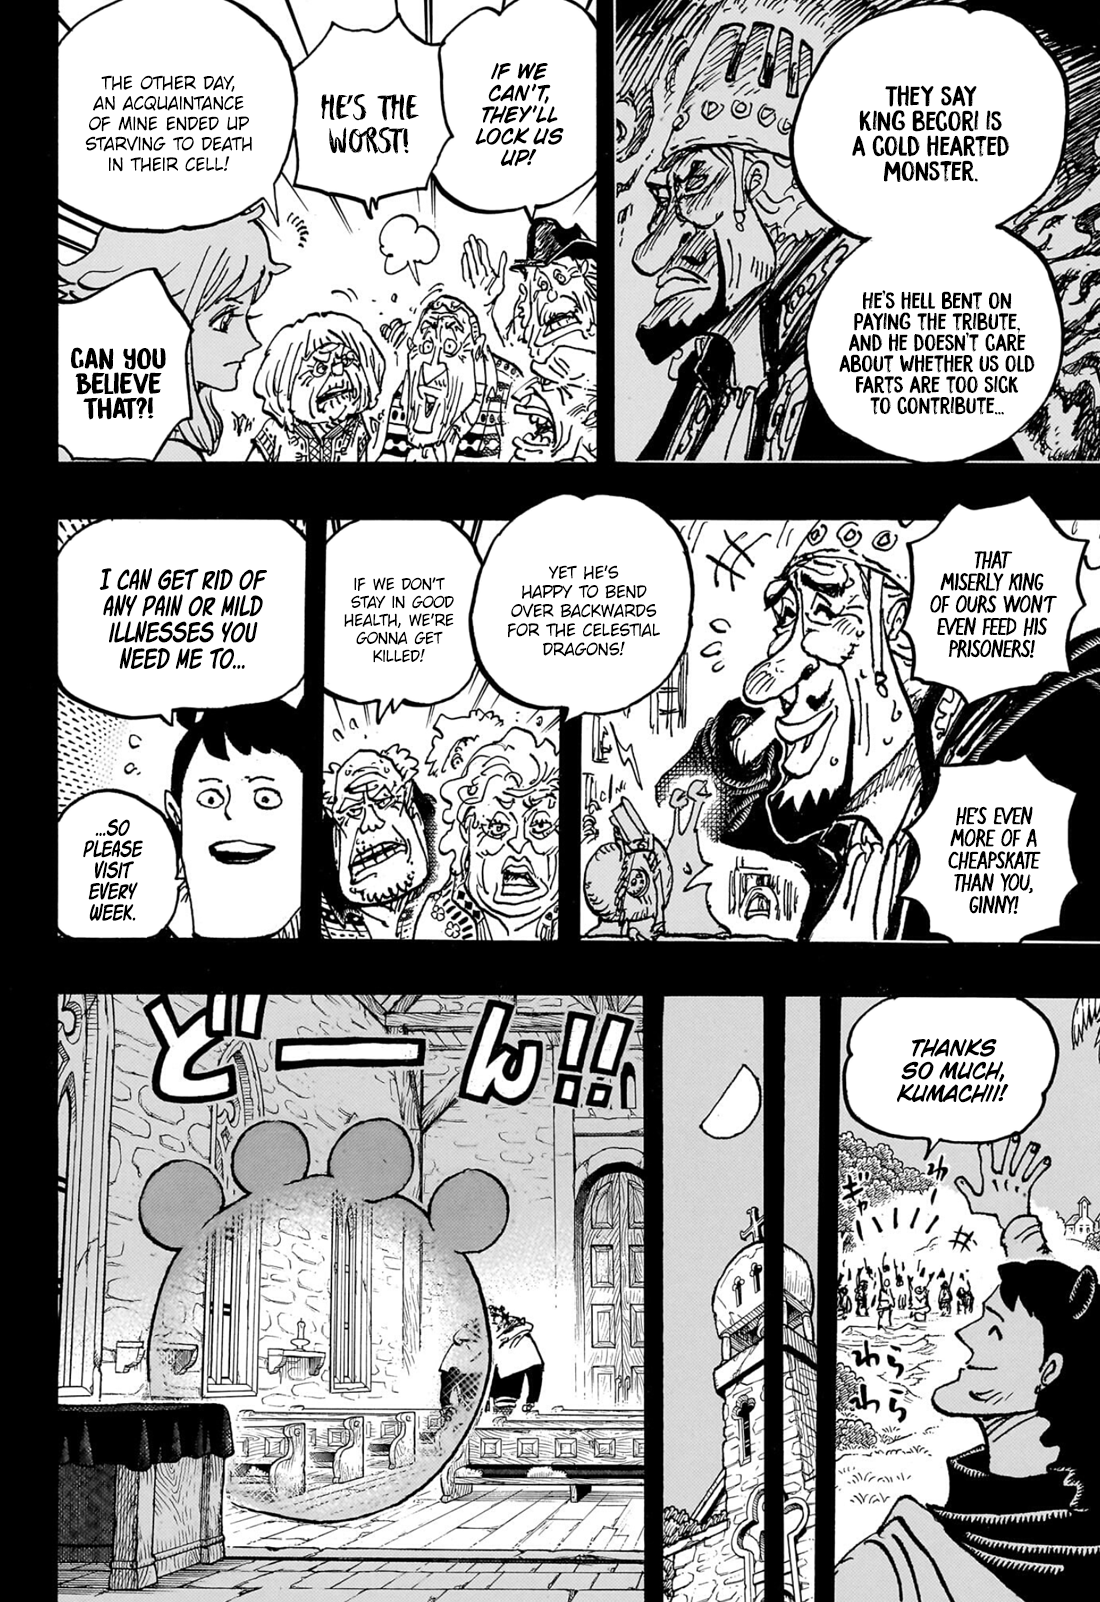 One Piece: Chapter 1074 - Theories and Discussion : r/OnePiece